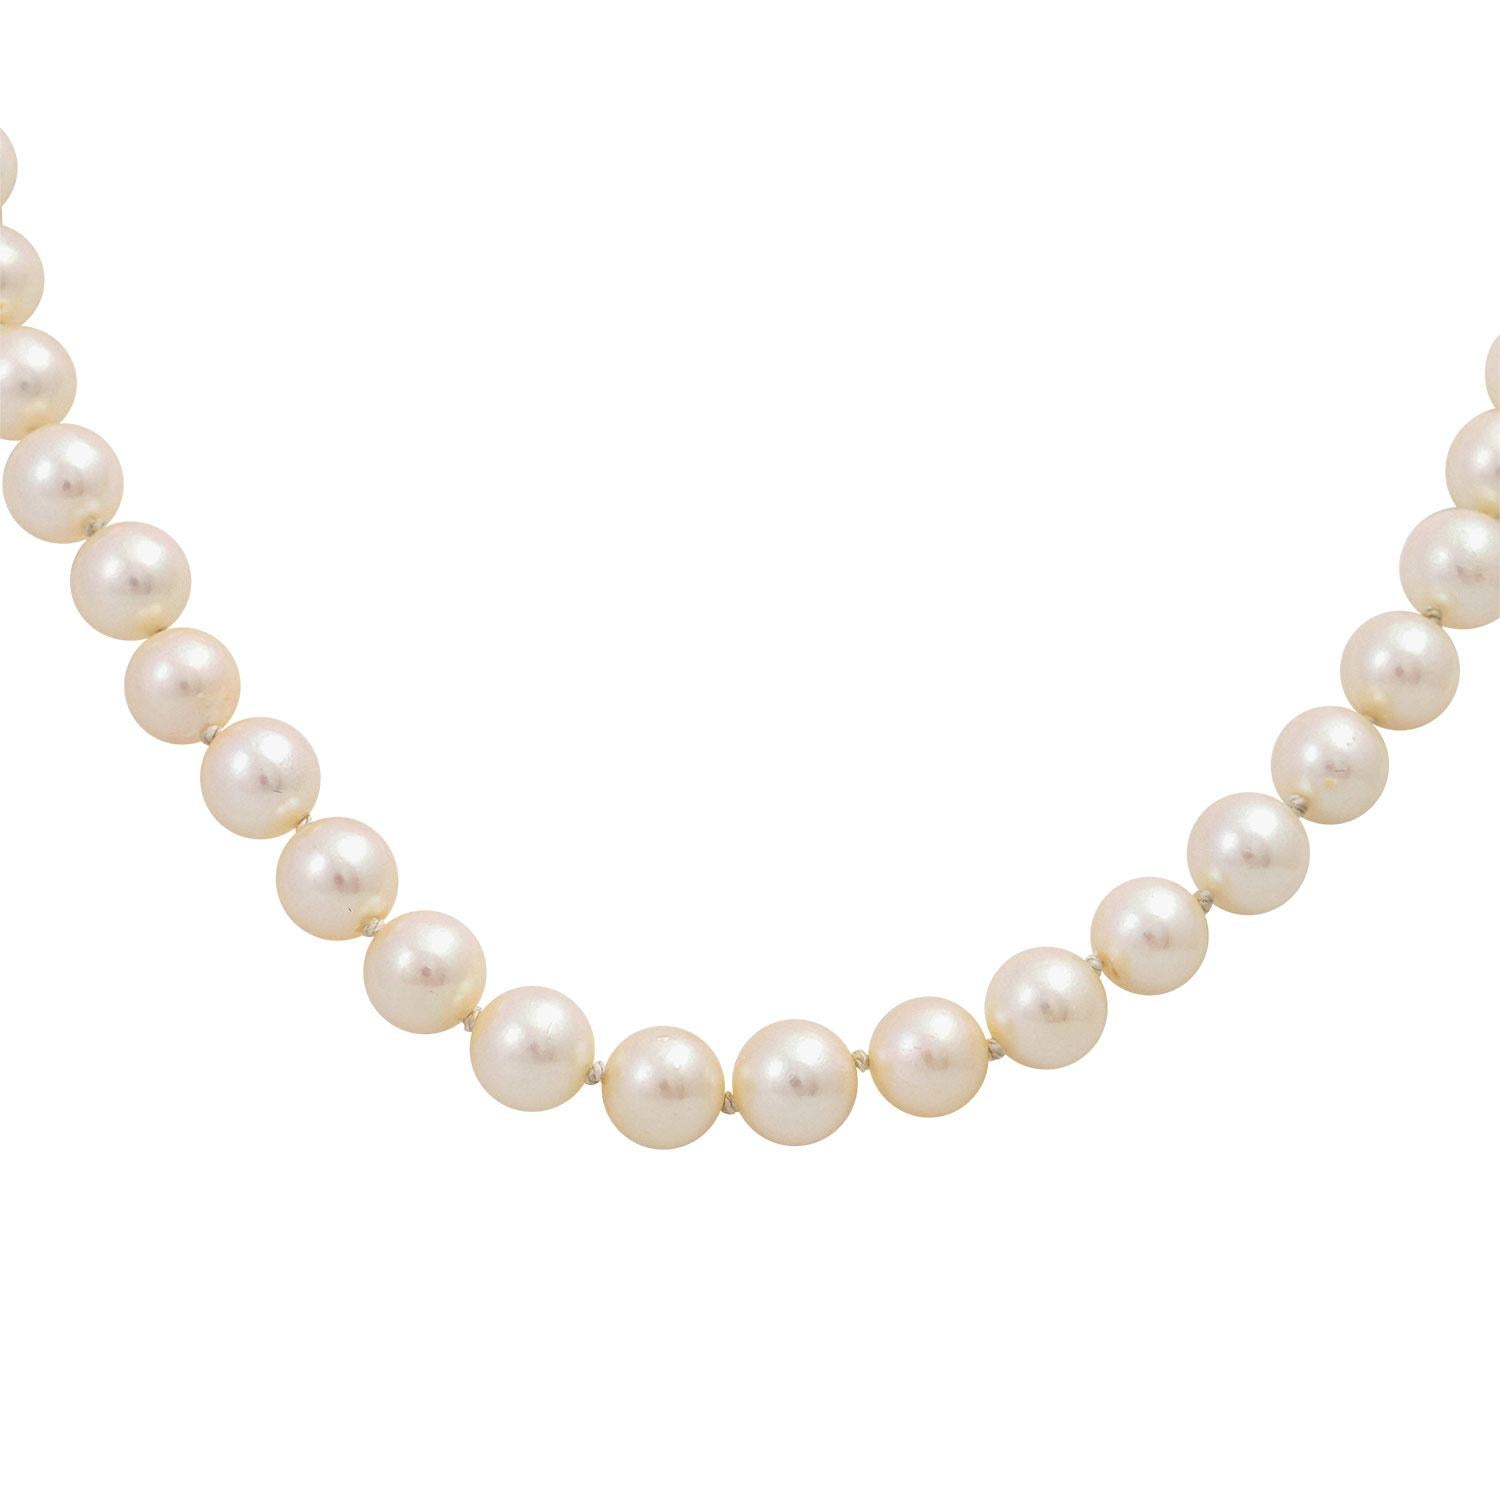 approx. 7.5 mm, clasp with sapphires and cultured pearl, WG 14K, L: approx. 45 cm.
